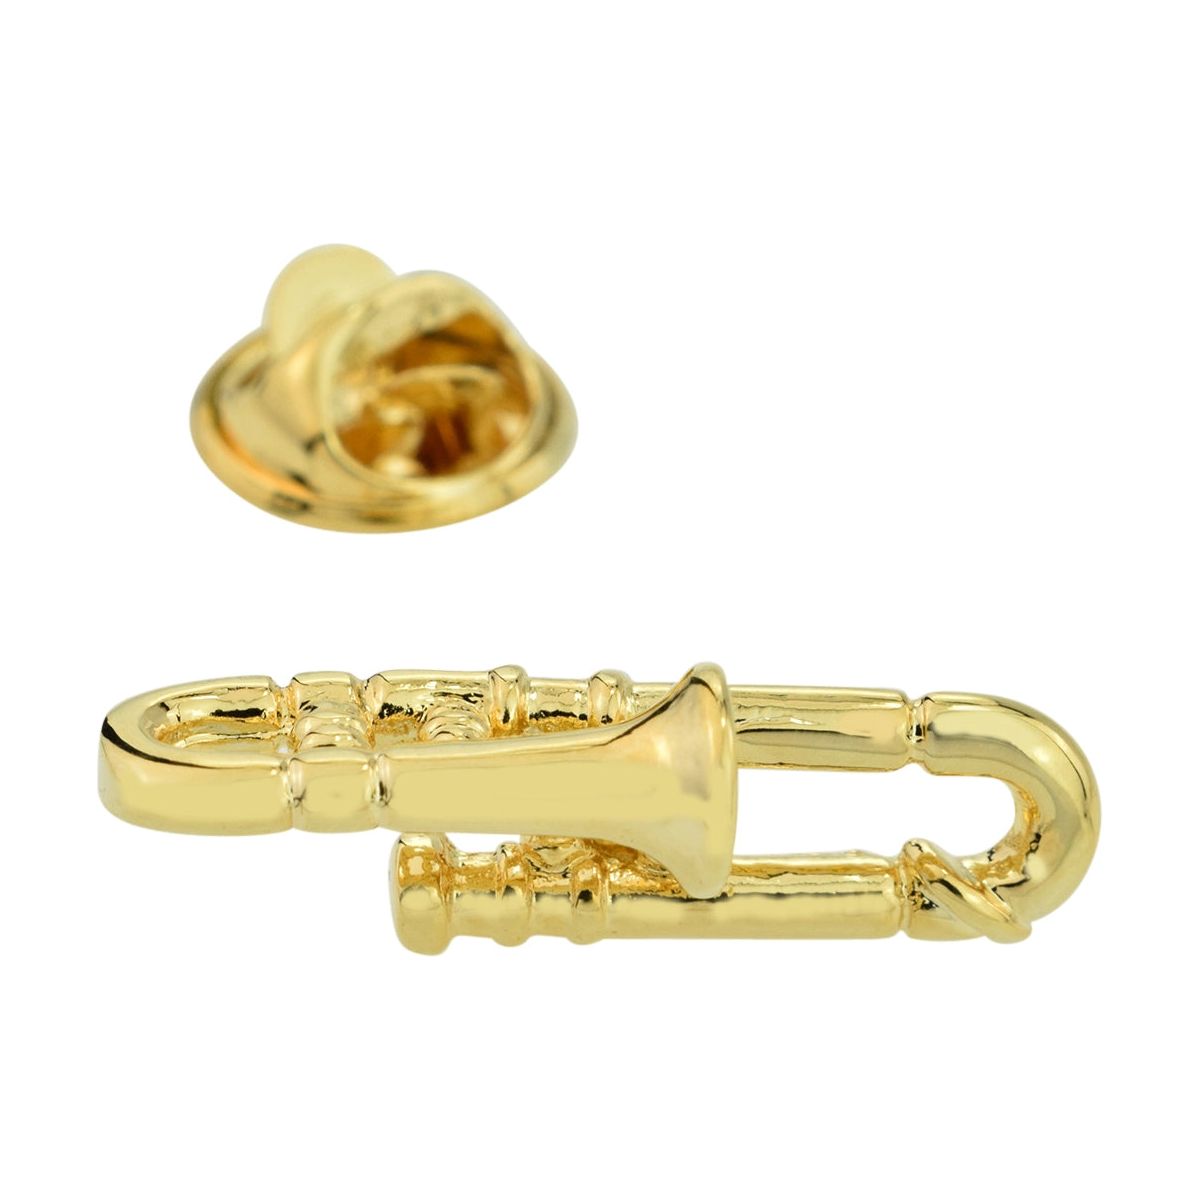 Gold Plated Trombone Music Instrument Lapel Pin badge - Ashton and Finch